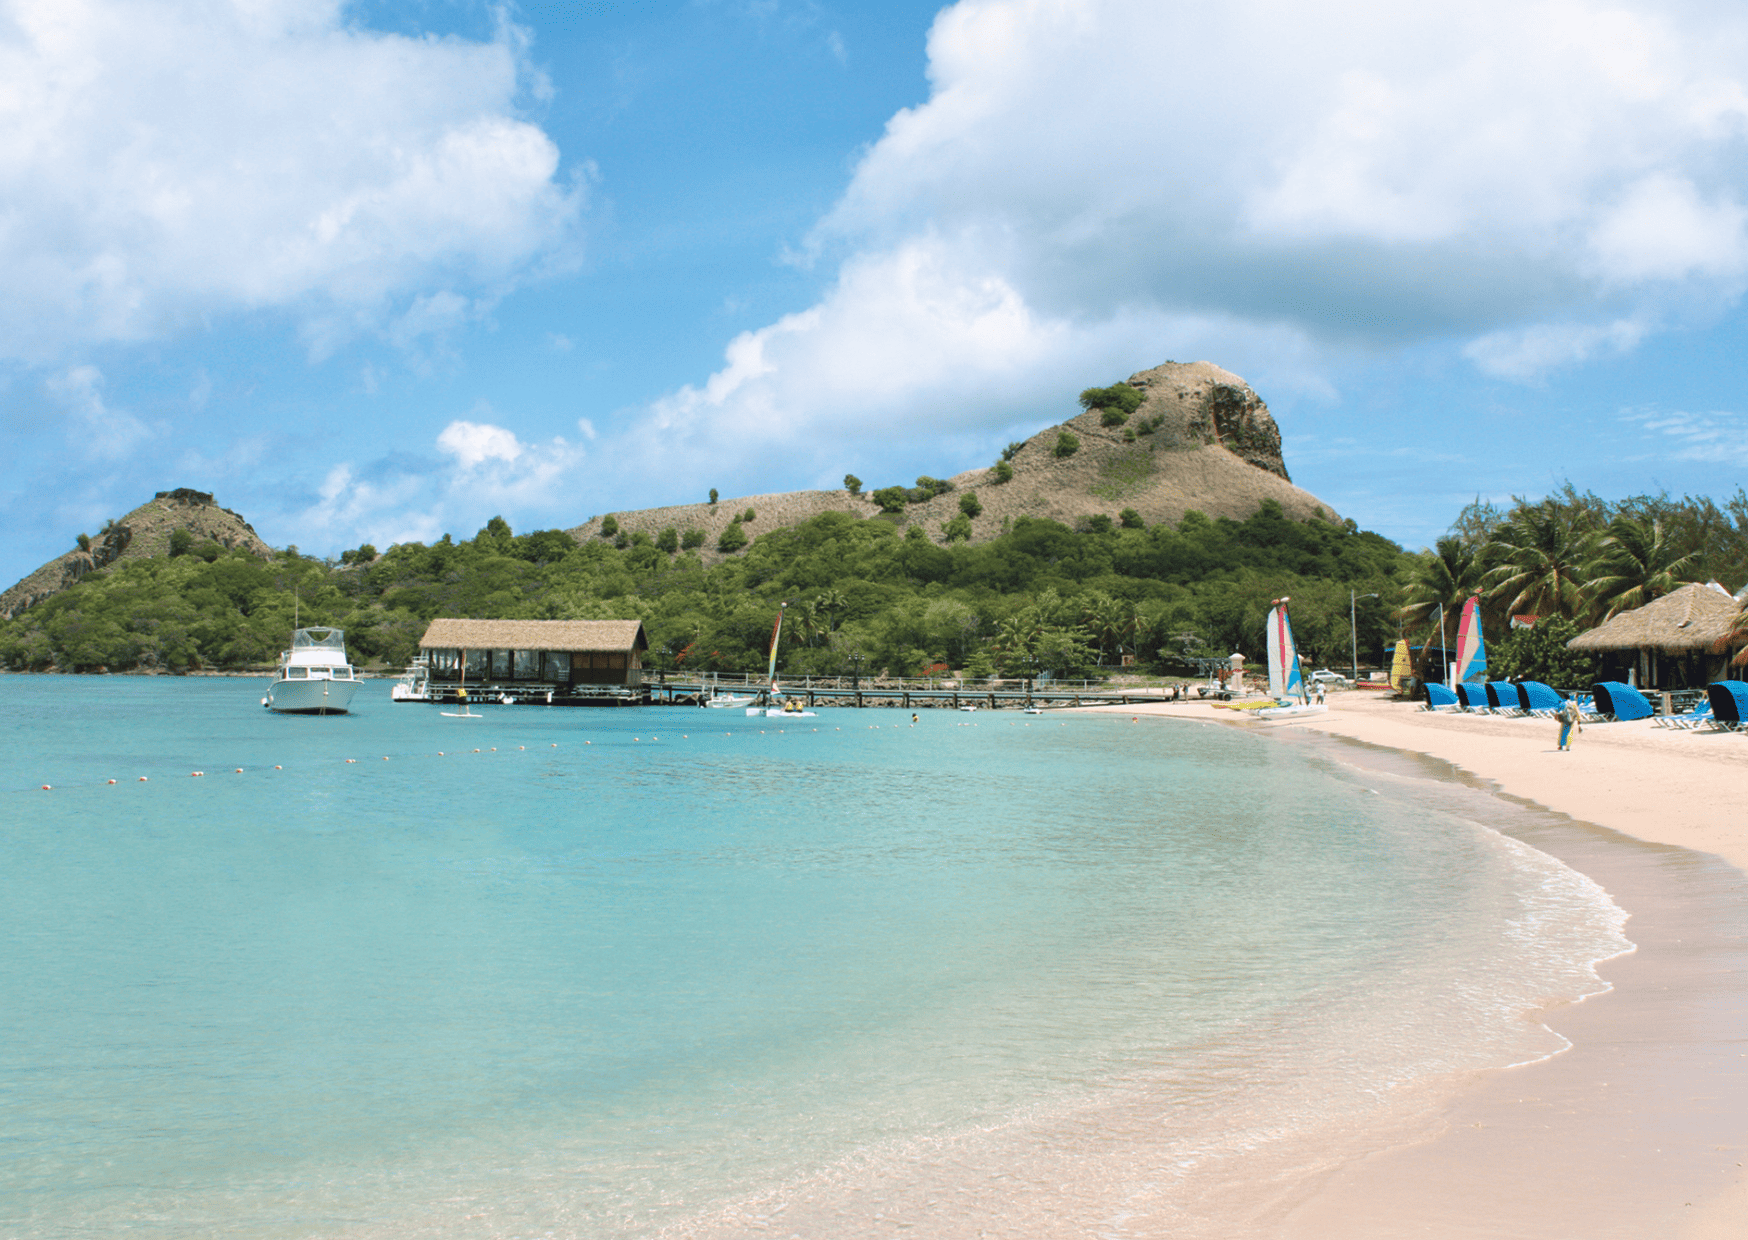 St Lucia vs Aruba - Which is the Better Caribbean Trip?